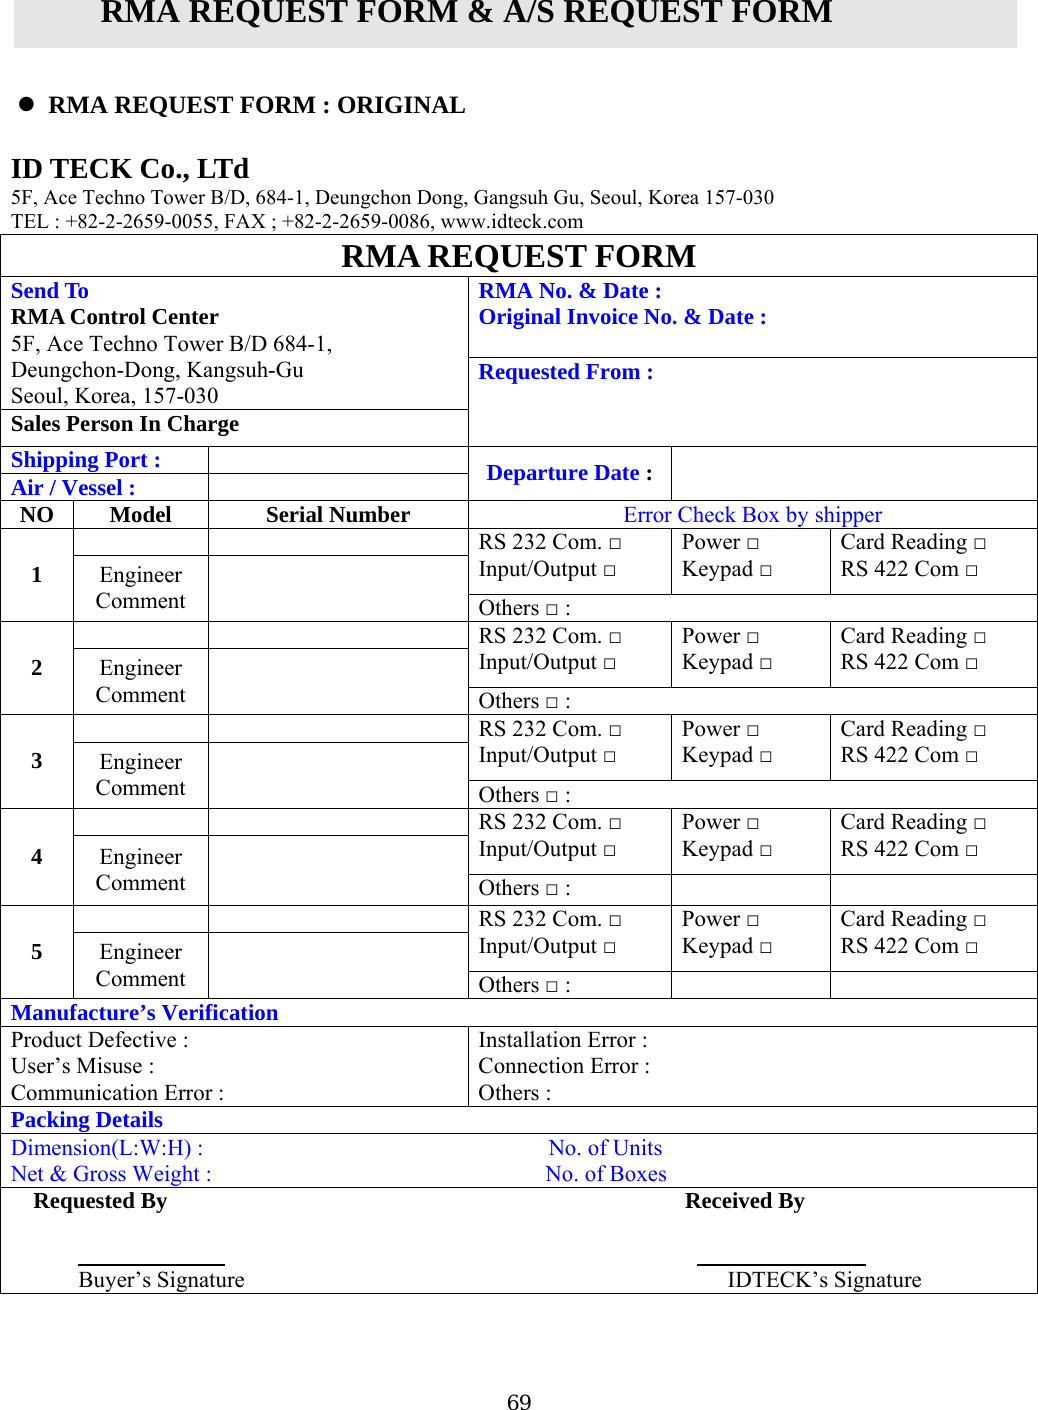 RMA REQUEST FORM &amp; A/S REQUEST FORM   ID5F, Ace Techno Tower BTEL : +82-2-2659-0055, FAX ; +82-2-2659-0086, www.idteck.com  RMA REQUEST FORM   RMA REQUEST FORM : ORIGINAL   TECK Co., LTd /D, 684-1, Deungchon Dong, Gangsuh Gu, Seoul, Korea 157-030 RMA No. &amp; Date : inal Invoice No. &amp; Date : OrigA Control Center SeRM5F, Ace Techno Tower B/D 684-1, Deungchon-Dong, Kangsuh-Gu Send To oul, Korea, 157-030 SaRequested From : les Person In Charge  Shipping Port : Ai Departure Date :  r / Vessel :    Model  Serial Number N Error Check Box by shipper O   RS 232 Com. □ Input/Output □ Power □ Keypad □ Card Reading □ RS 422 Com □ 1  Engineer   Comment  Others □ :   RS 232 Com. □ Input/Output □ Power □ Keypad □ Card Reading □ RS 422 Com □ 2  Engineer   Comment  Others □ :   RS 232 Com. □ Input/Output □ Power □ Keypad □ Card Reading □ RS 422 Com □ 3  Engineer   Comment  Others □ :   RS 232 Com. □ Input/Output □ Power □ Keypad □ Card Reading □ RS 422 Com □ 4  Engineer Comment  OthersRS 232 Com  □ :      . □ Input/Output □ Power □ Keypad □ Card Reading □ RS 422 Com □ 5  Engineer Comment  Others □ :   Manufacture’s Verification oduct Defective :    InstallatioPrUsCon Error : er’s Misuse :  Connection Error : Others : mmunication Error :Packing Details Di      No. of Units Ne . of Boxes mension(L:W:H) :                         t &amp; Gross Weight :                             NoRequested By                                              Received By                                                                                   Buyer’s Signature                                          IDTECK’s Signature     69